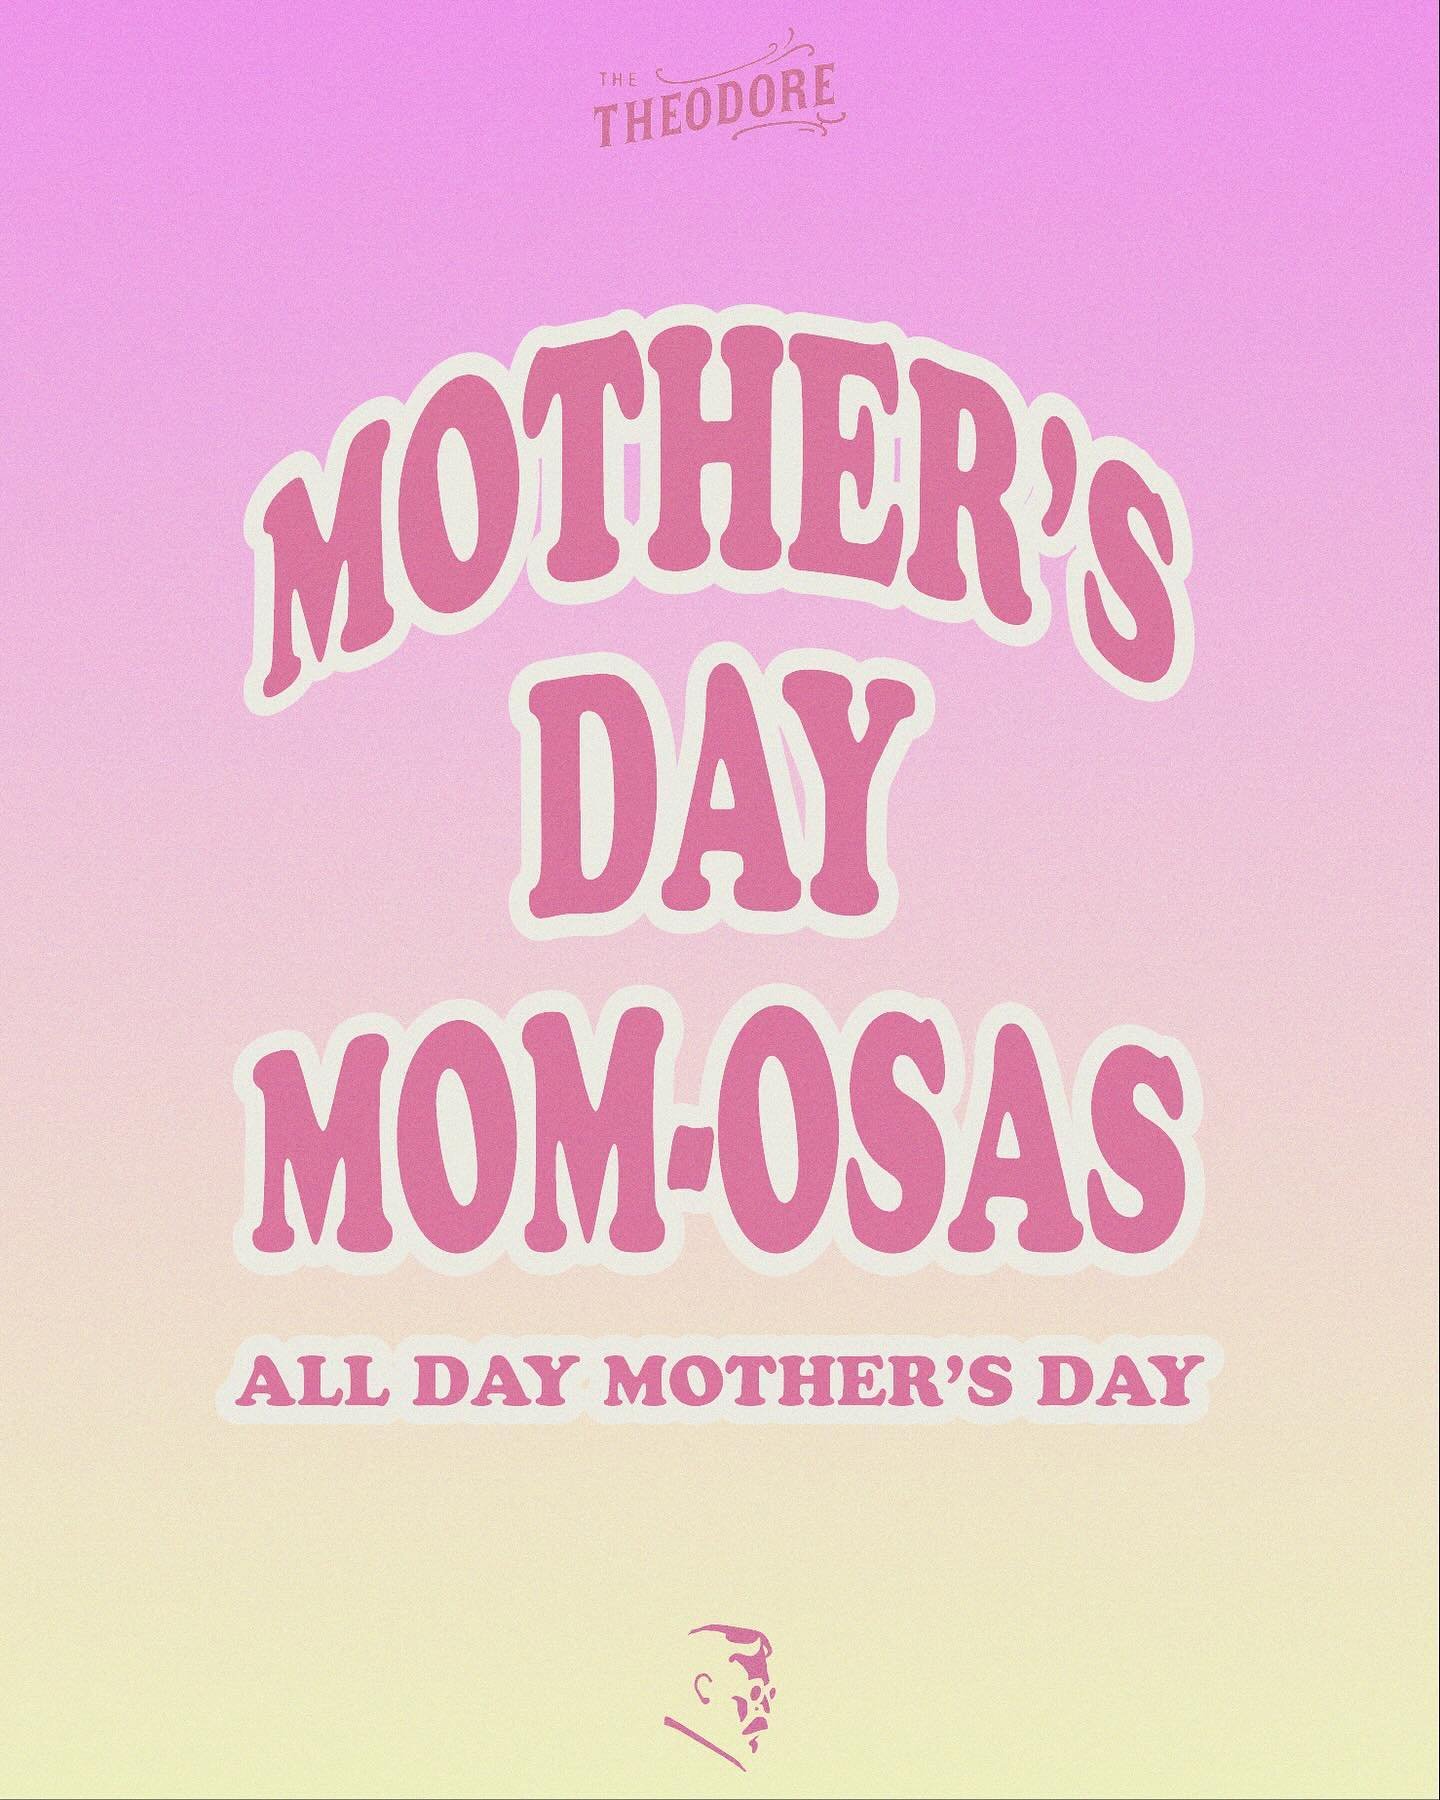 CALLING ALL THE MOMS!! 🍾🍾🍾

We&rsquo;ve got MOM-OSAS this Sunday to celebrate! Whether you&rsquo;re doing a traditional mimosa, one with Cocchi Rossa, or @superstitionmeadery Strawberry Sunrise - we&rsquo;re dishing them out at a ✌️ dollar off dis